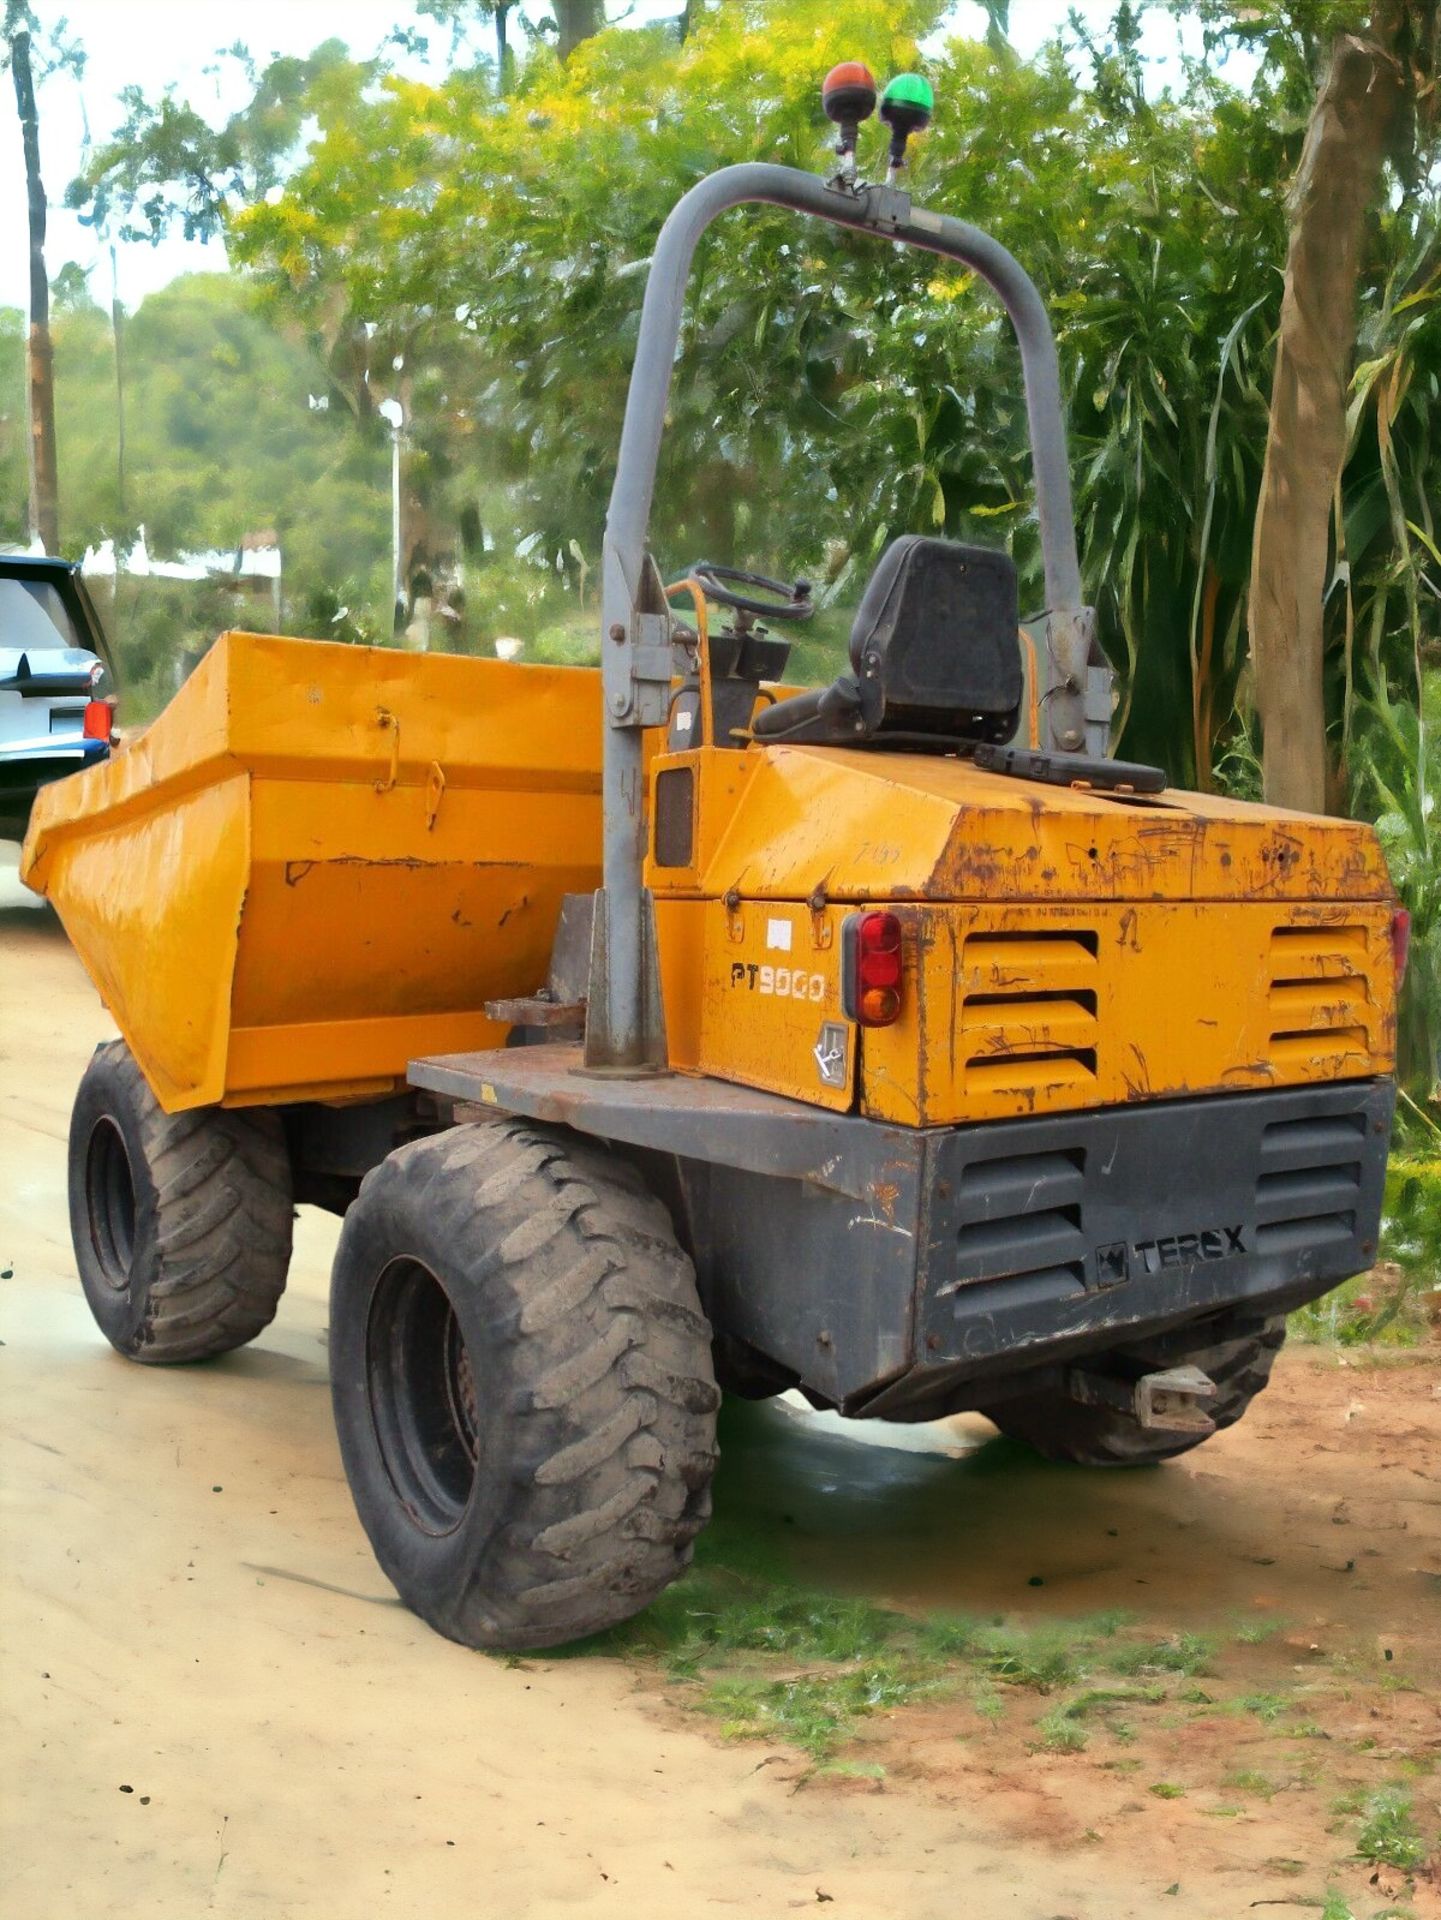 DOMINATE THE TERRAIN WITH THE TEREX PT9000 9-TON DUMPER - Image 4 of 11